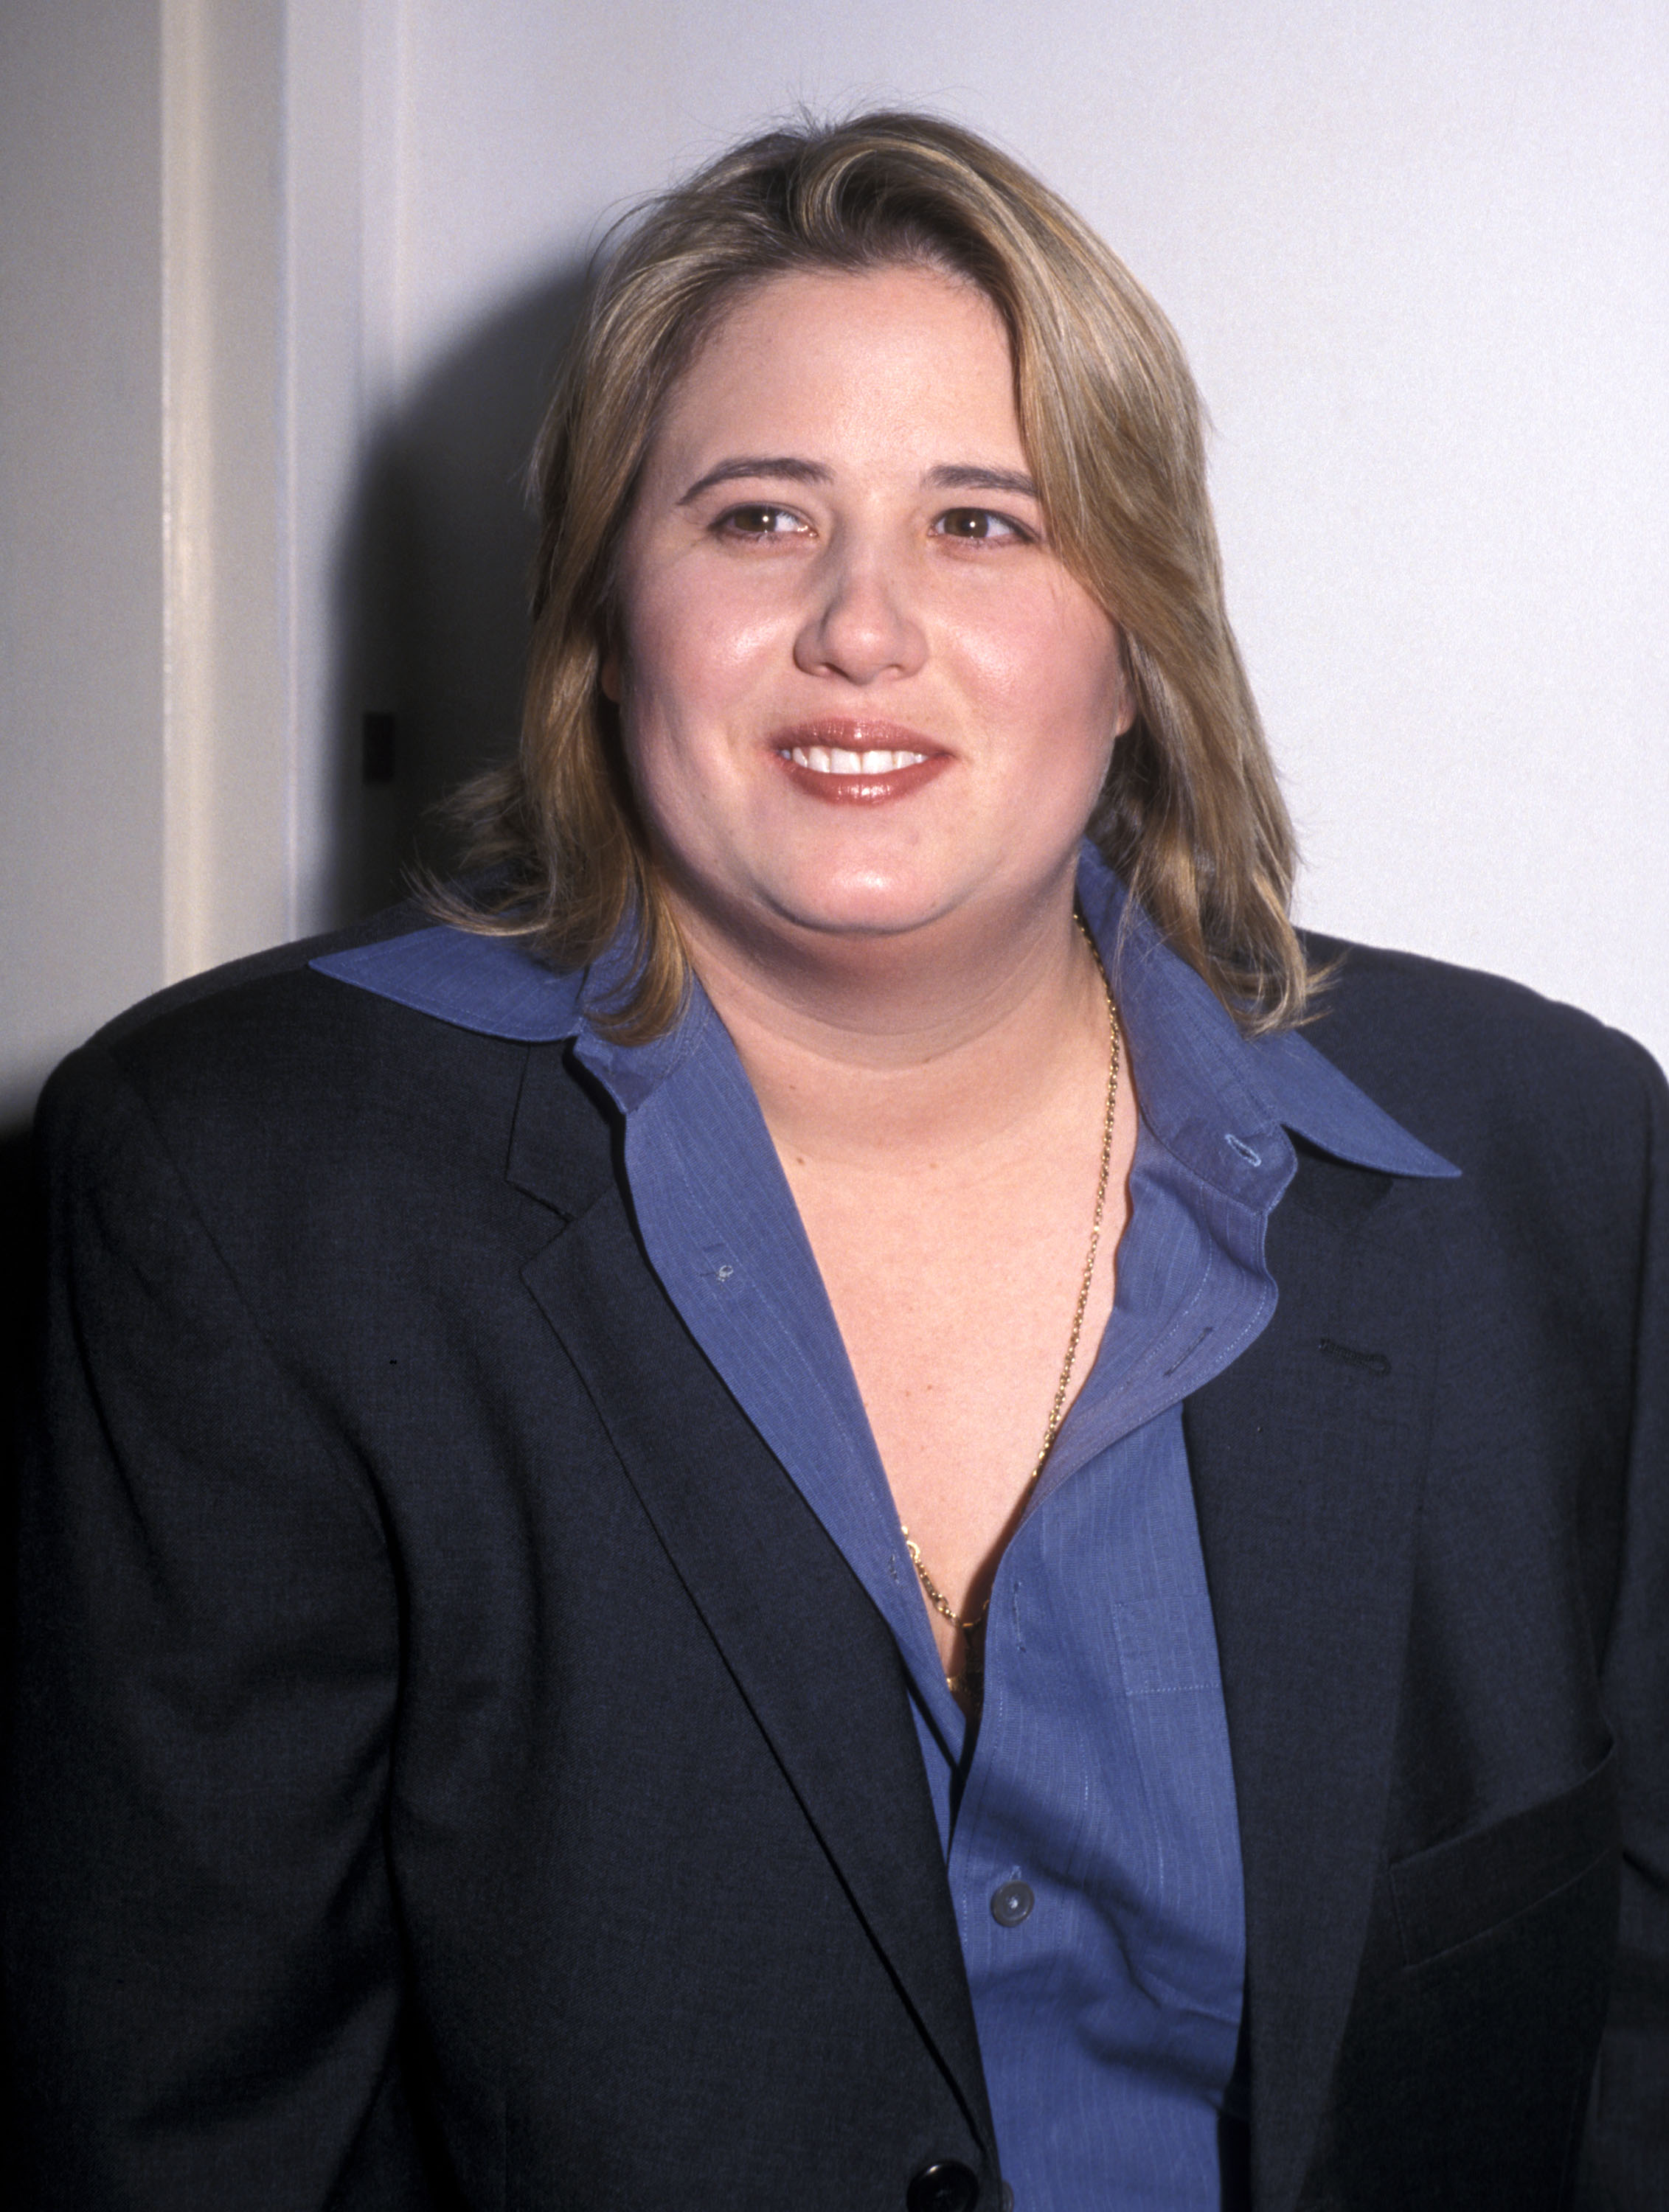 Chaz (Chastity) Bono attends the 1999 Emery Awards & the Henrick-Martin Institute's 20th Anniversary Celebration on November 29, 1999 in New York City | Source: Getty Images